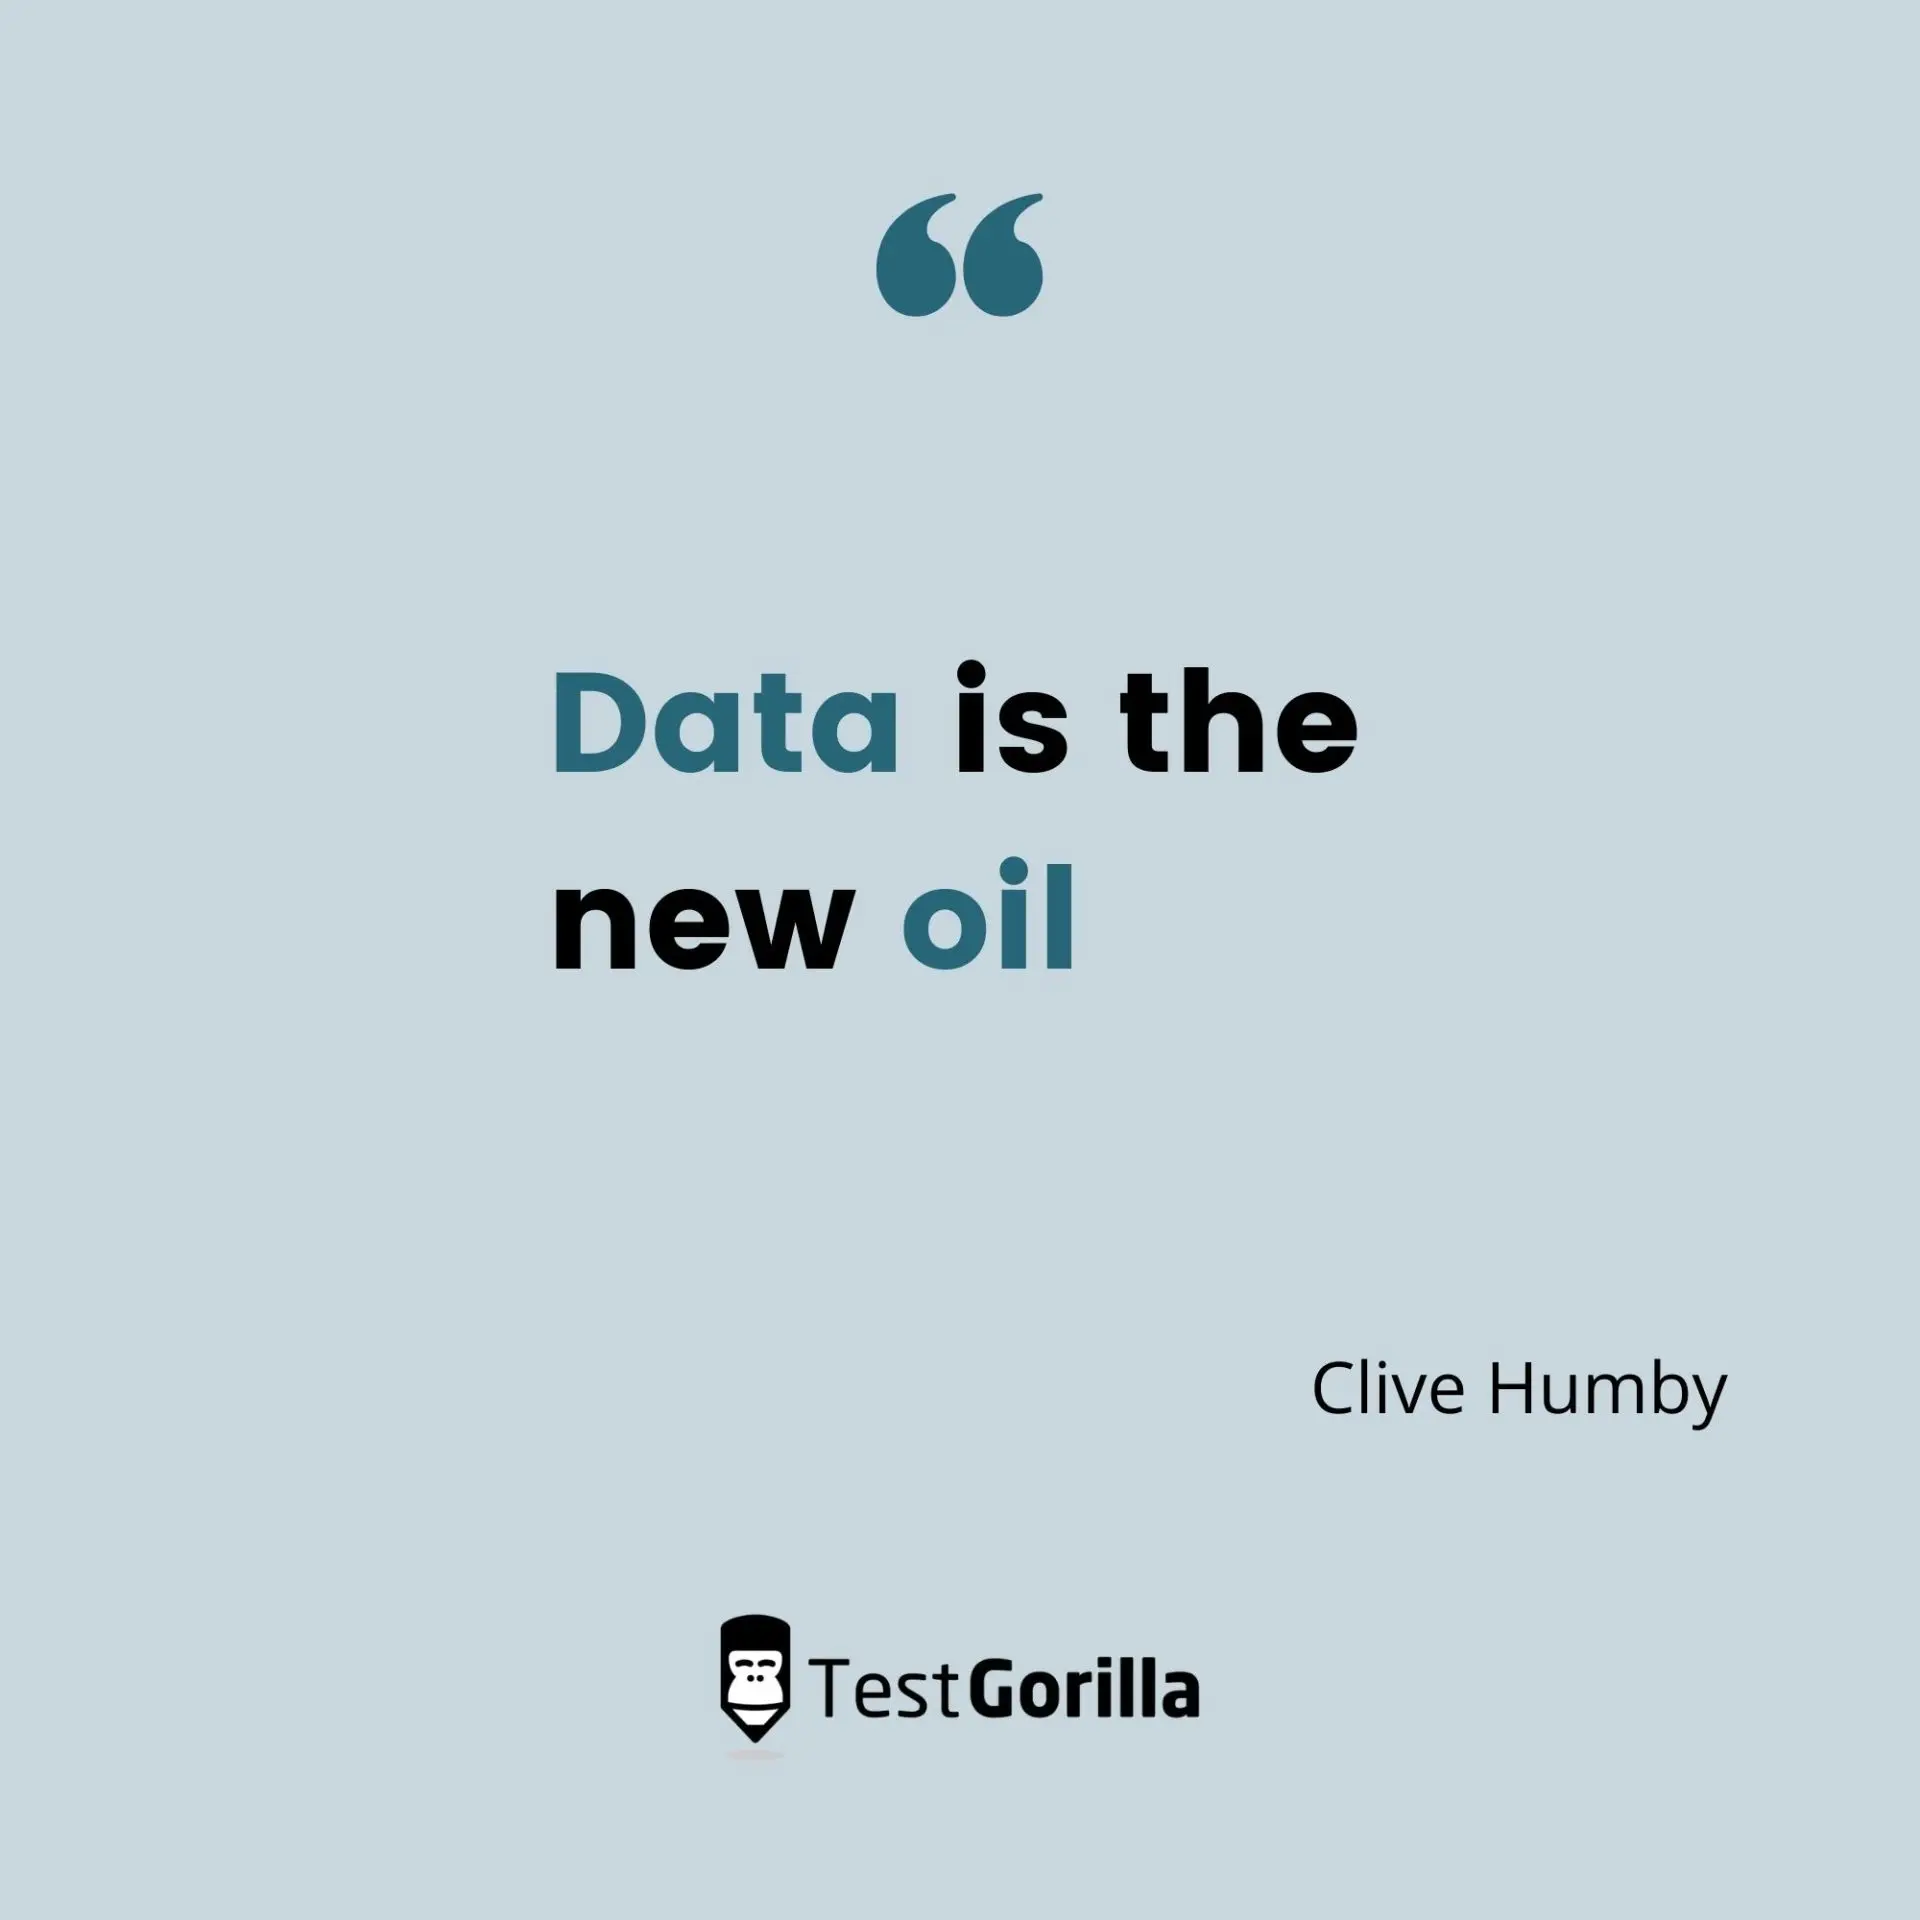 banner image for quote - data is the new oil